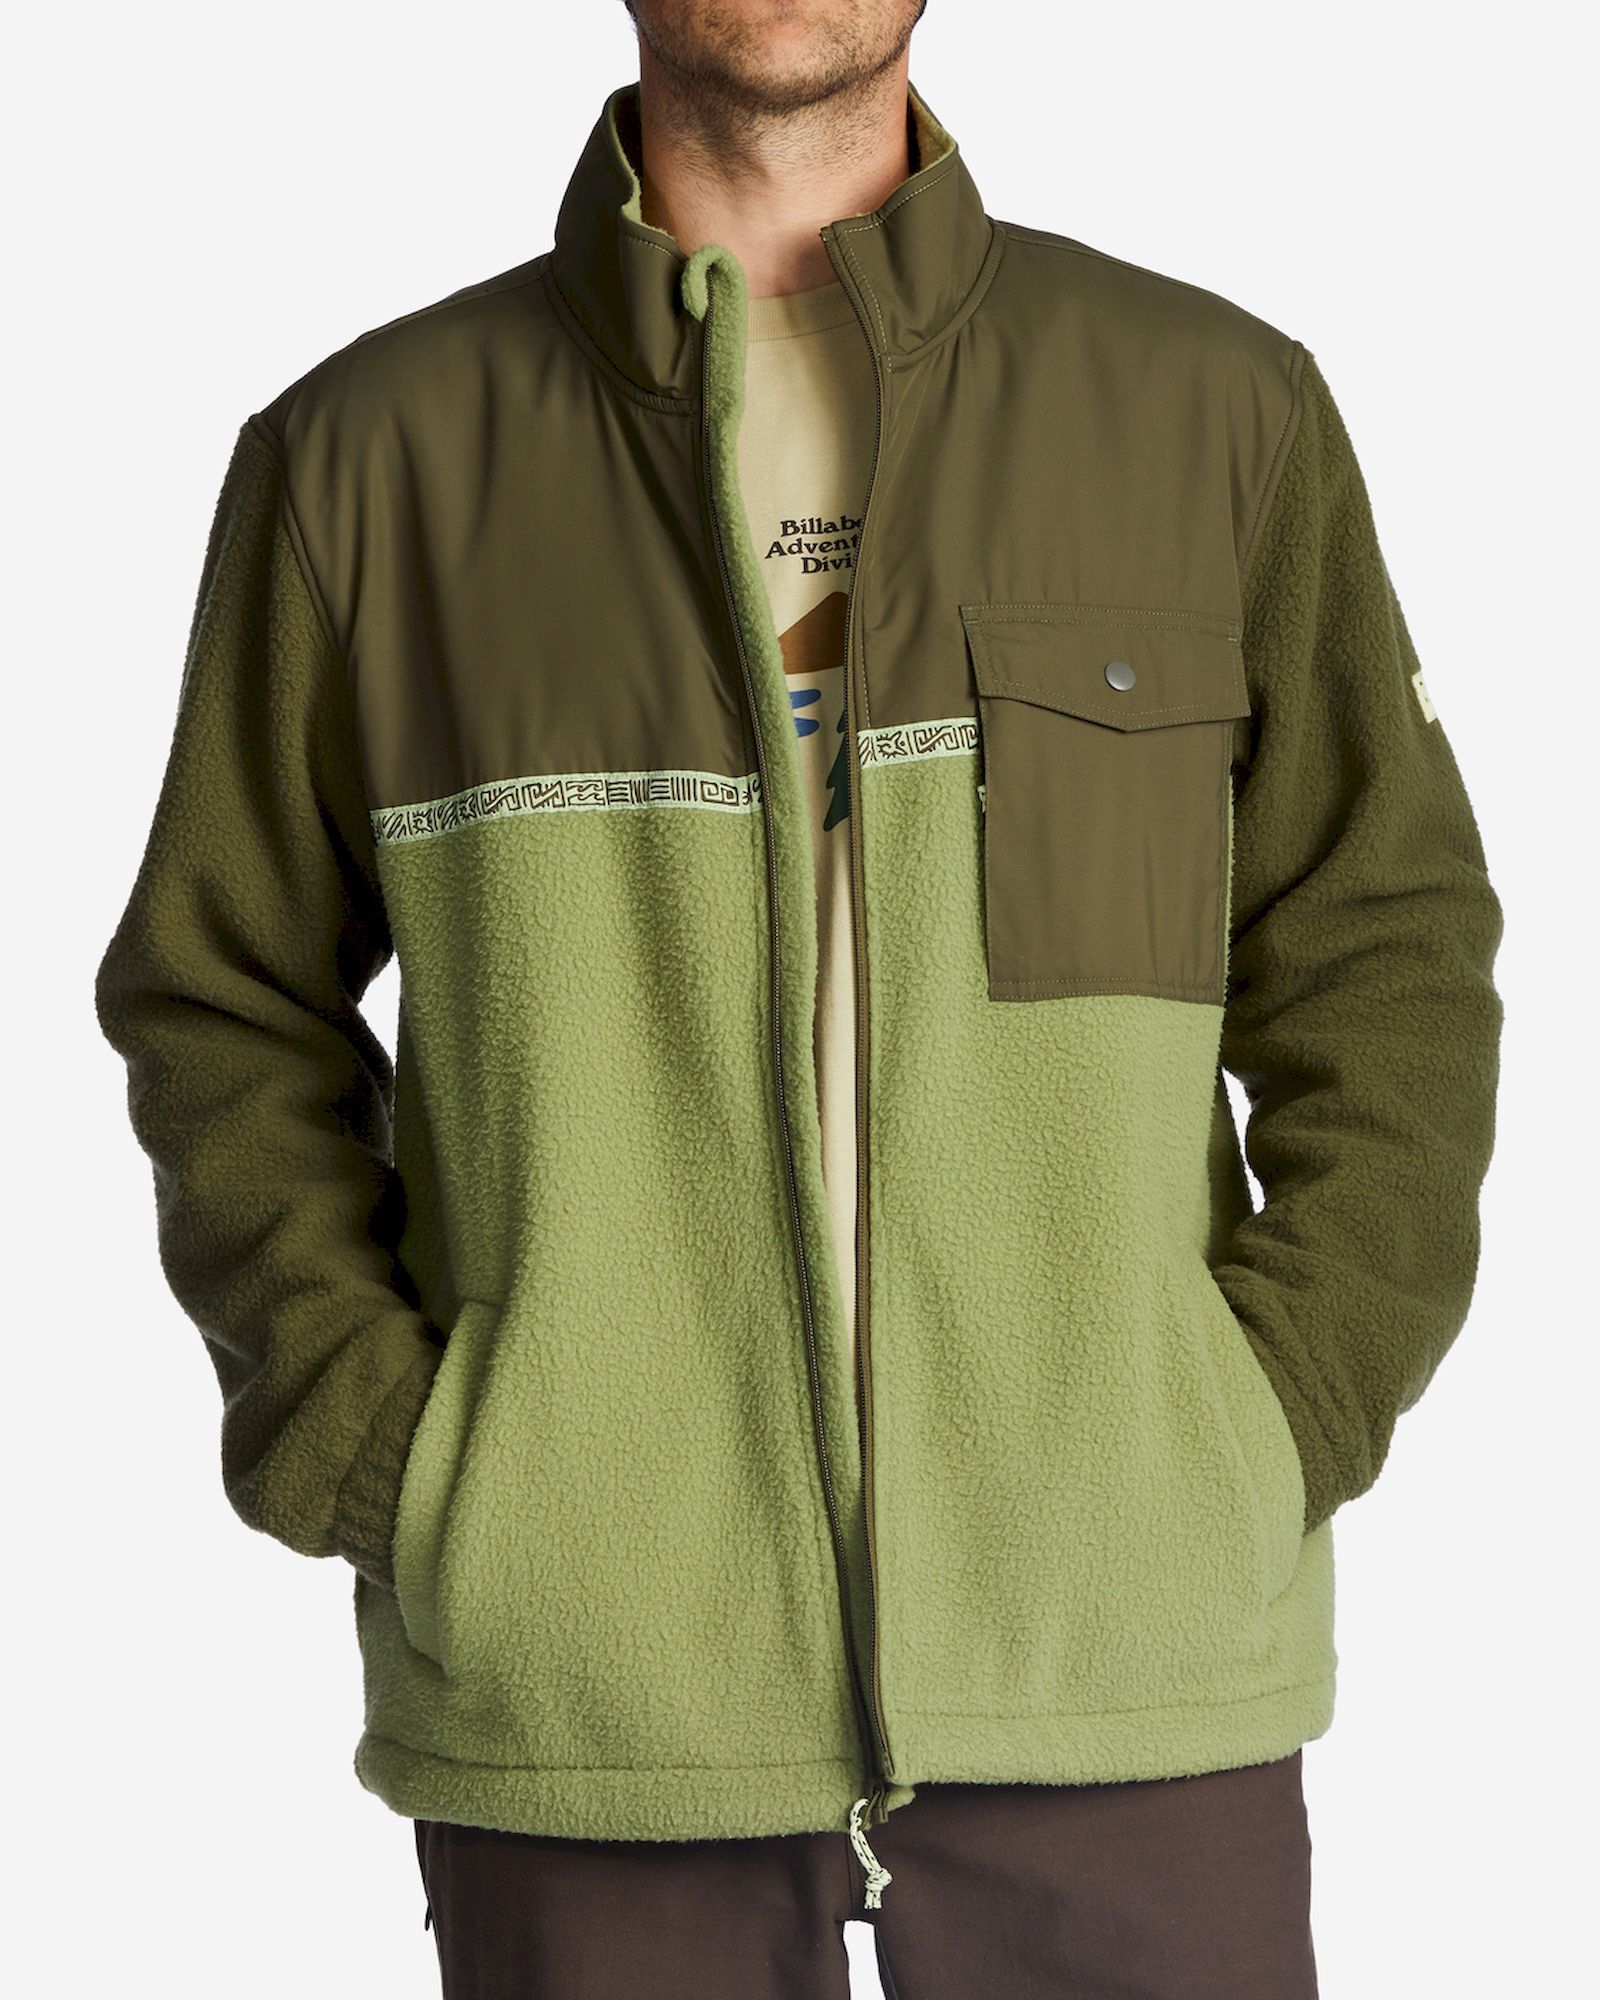 Billabong Boundary Trail Zip Up - Polaire homme | Hardloop